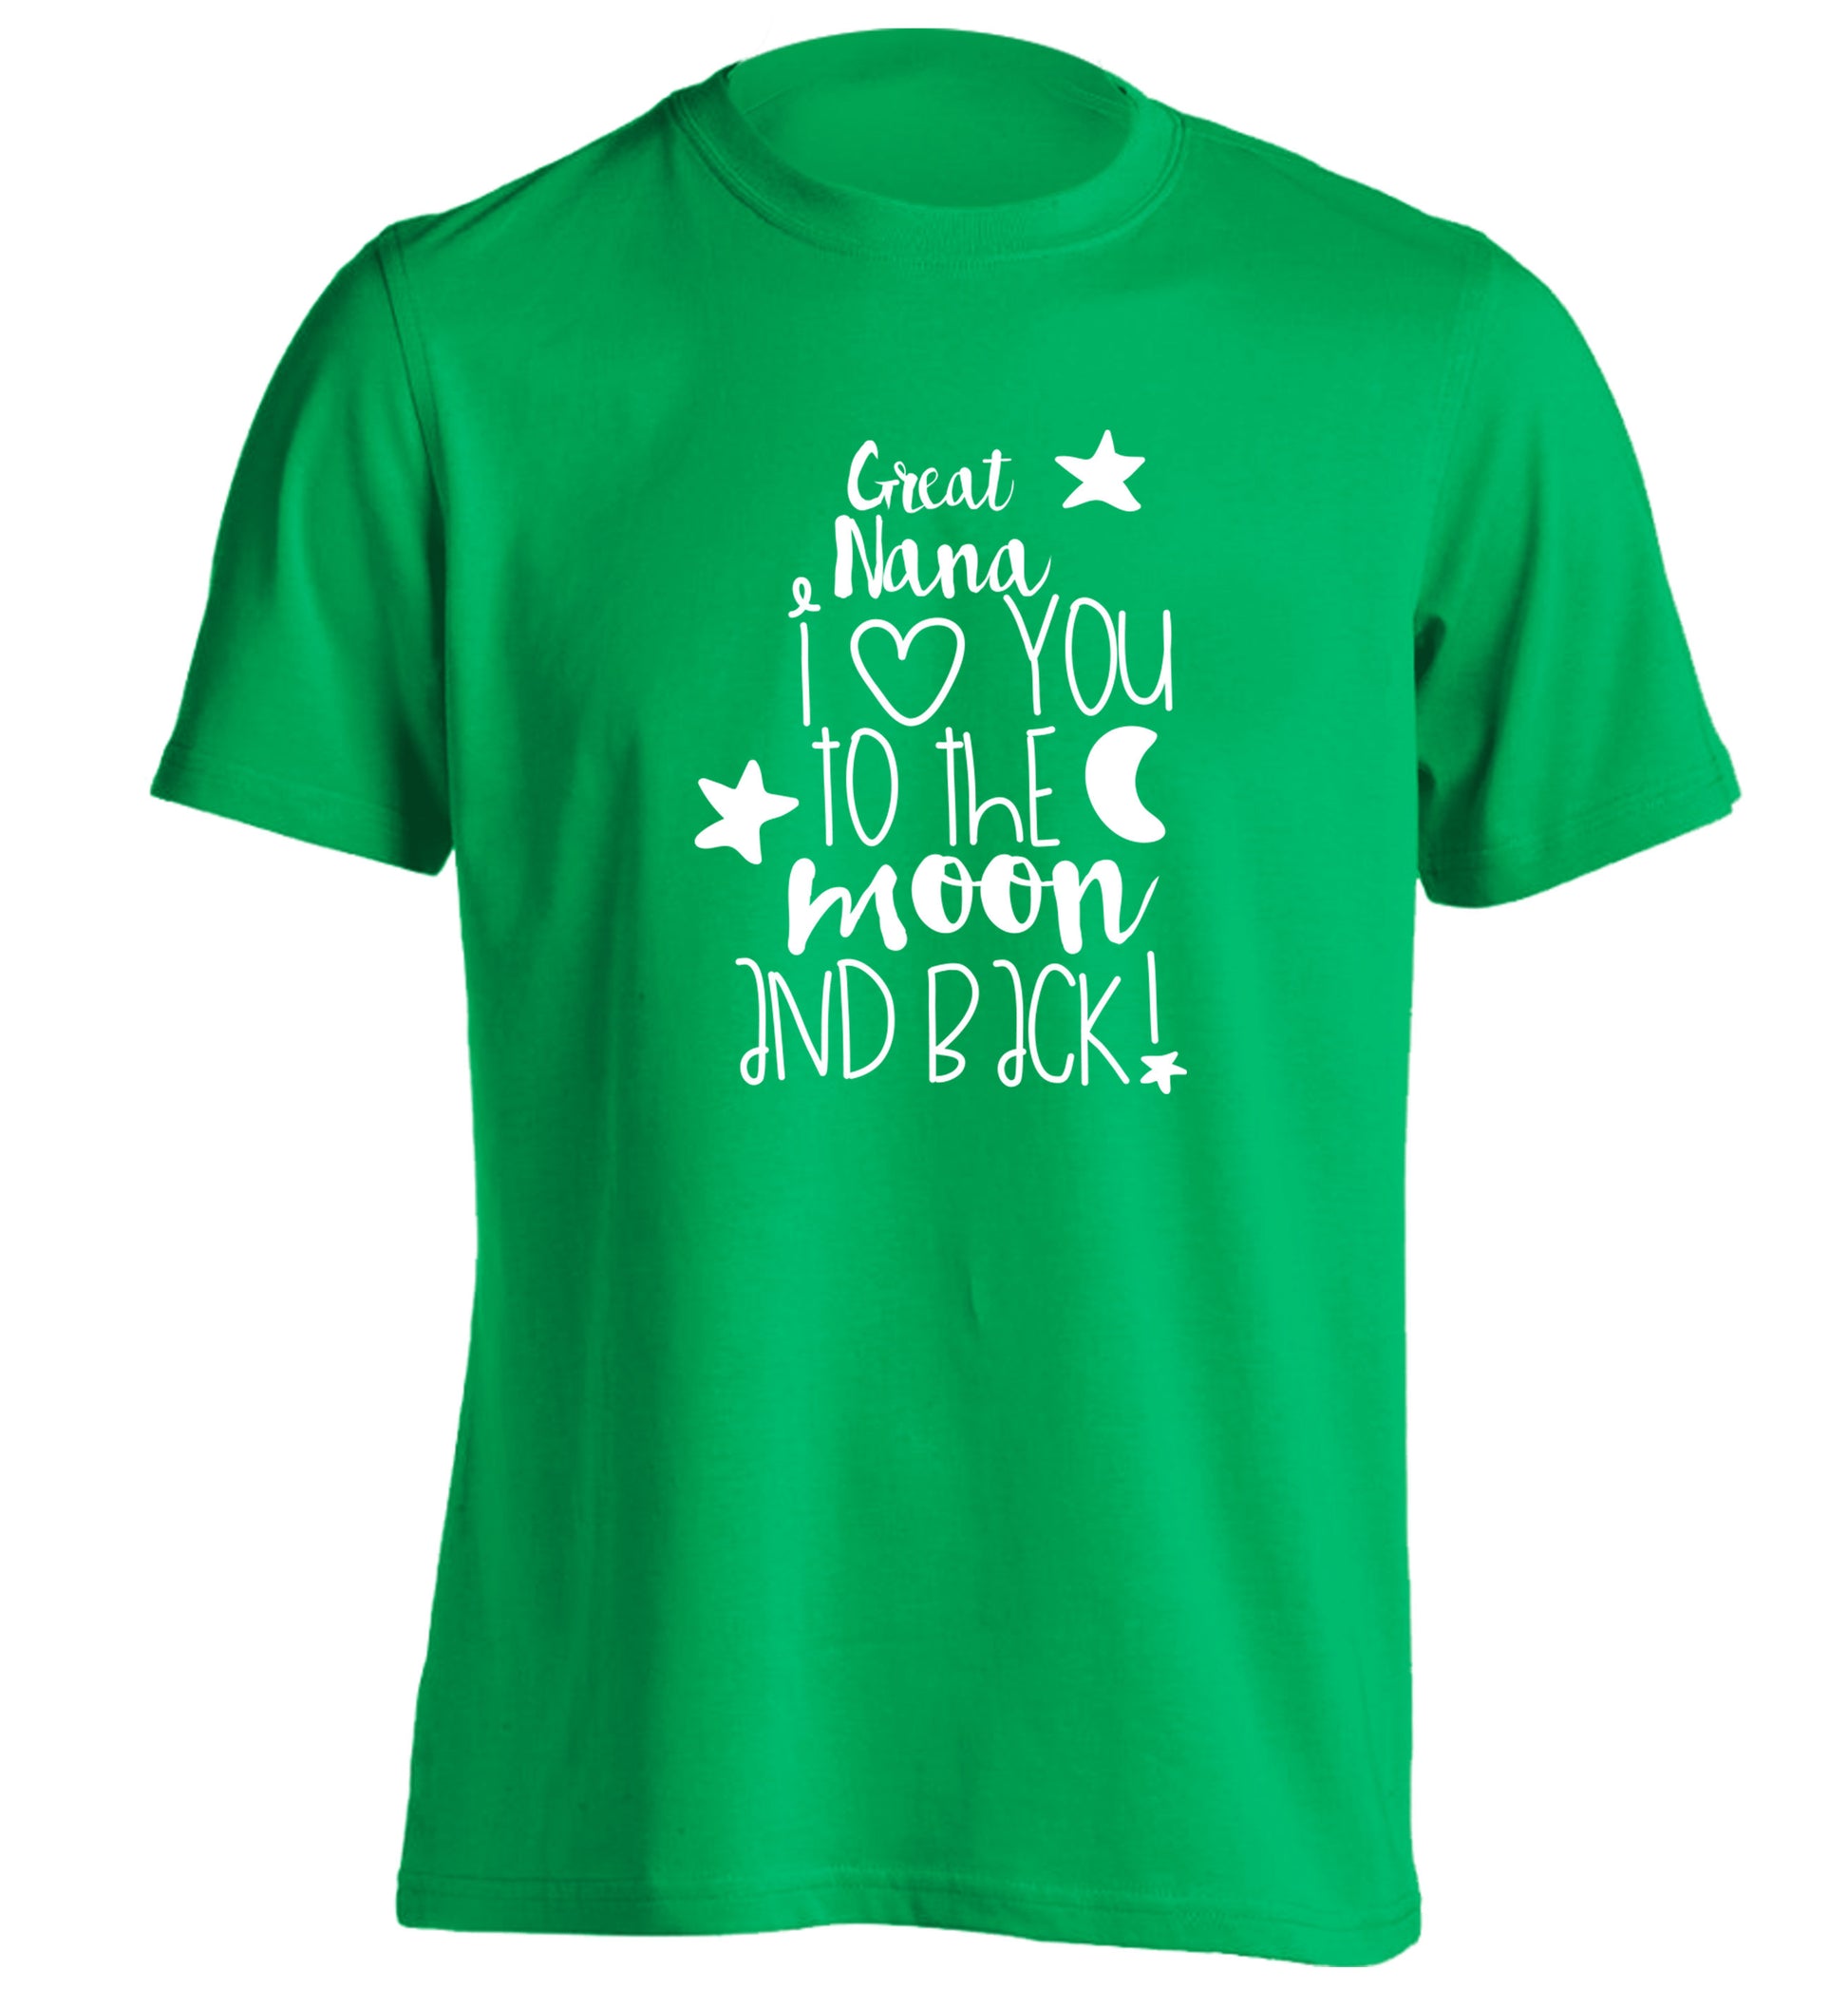 Great Nana I love you to the moon and back adults unisex green Tshirt 2XL